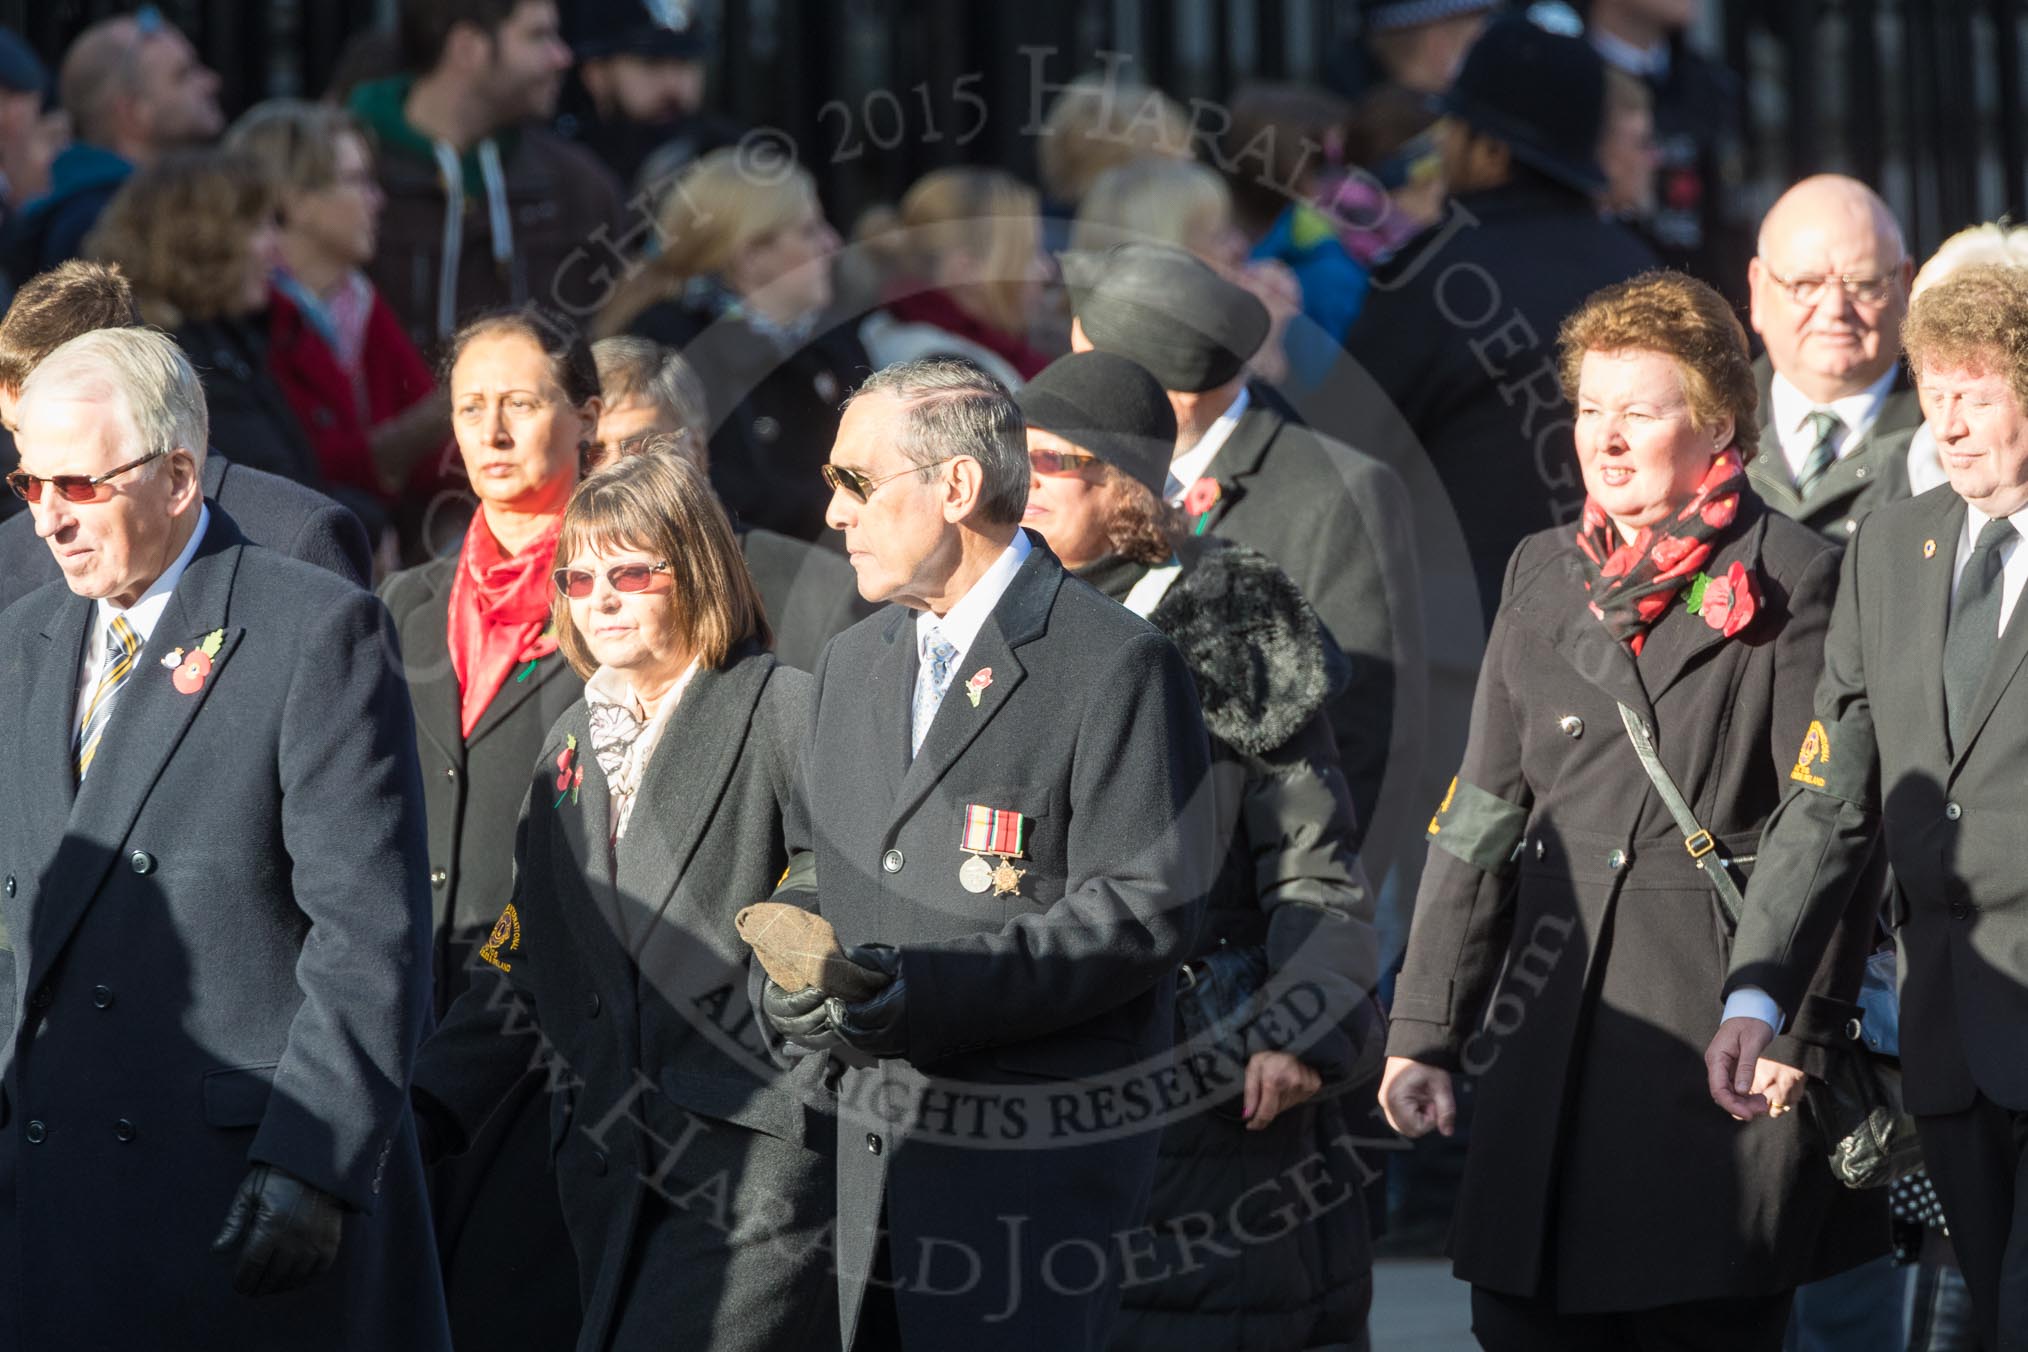 March Past, Remembrance Sunday at the Cenotaph 2016: M28 Lions Club International.
Cenotaph, Whitehall, London SW1,
London,
Greater London,
United Kingdom,
on 13 November 2016 at 13:17, image #2739